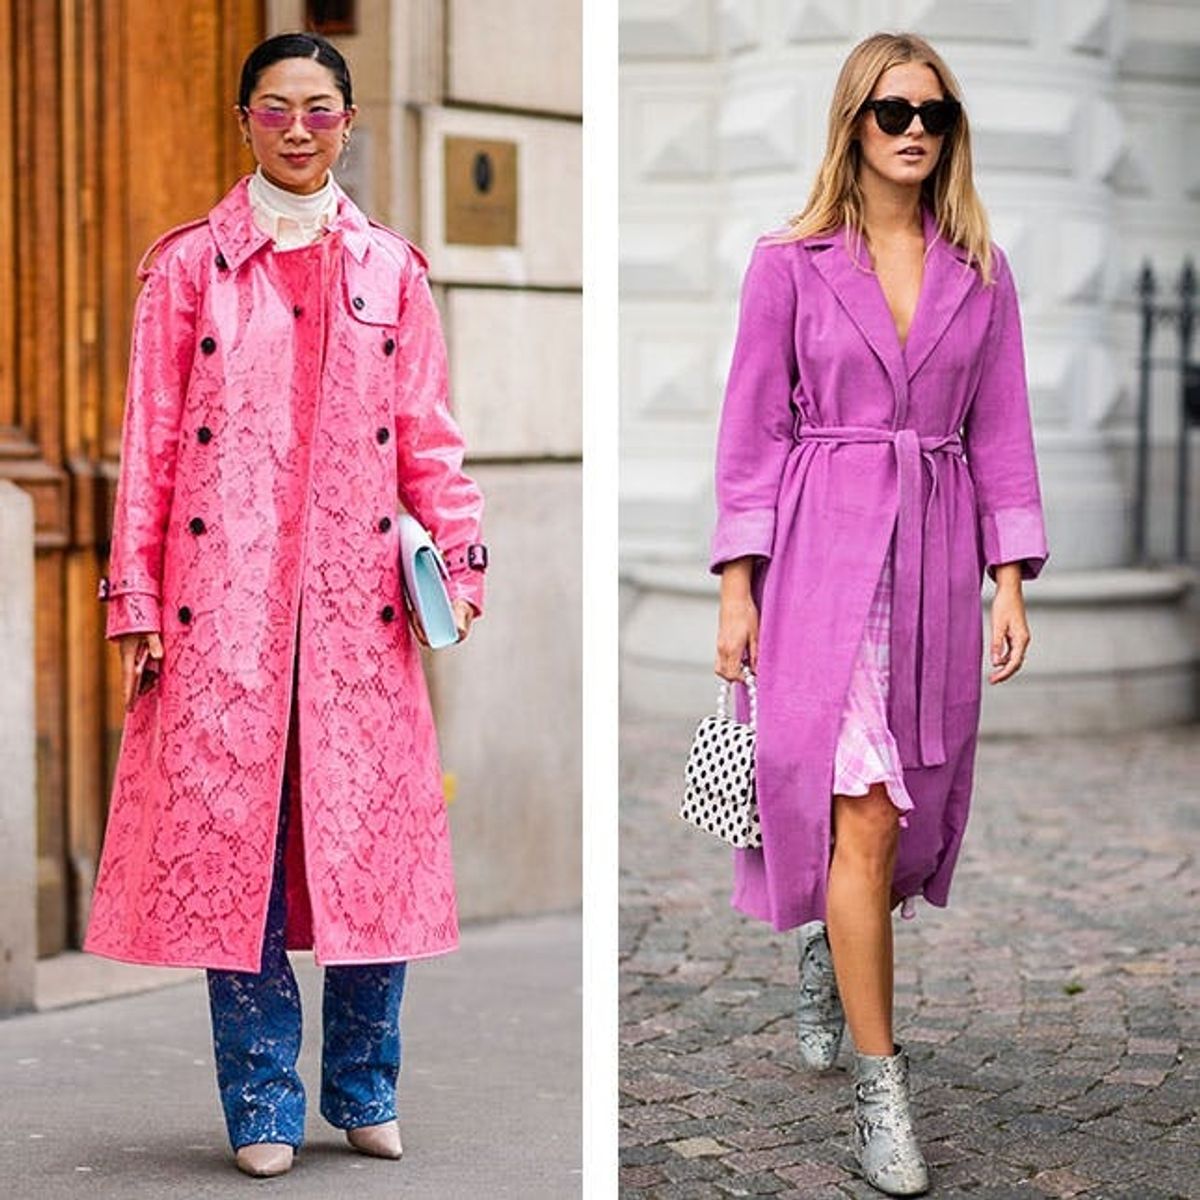 The Top Fashion Trends to Know in 2019